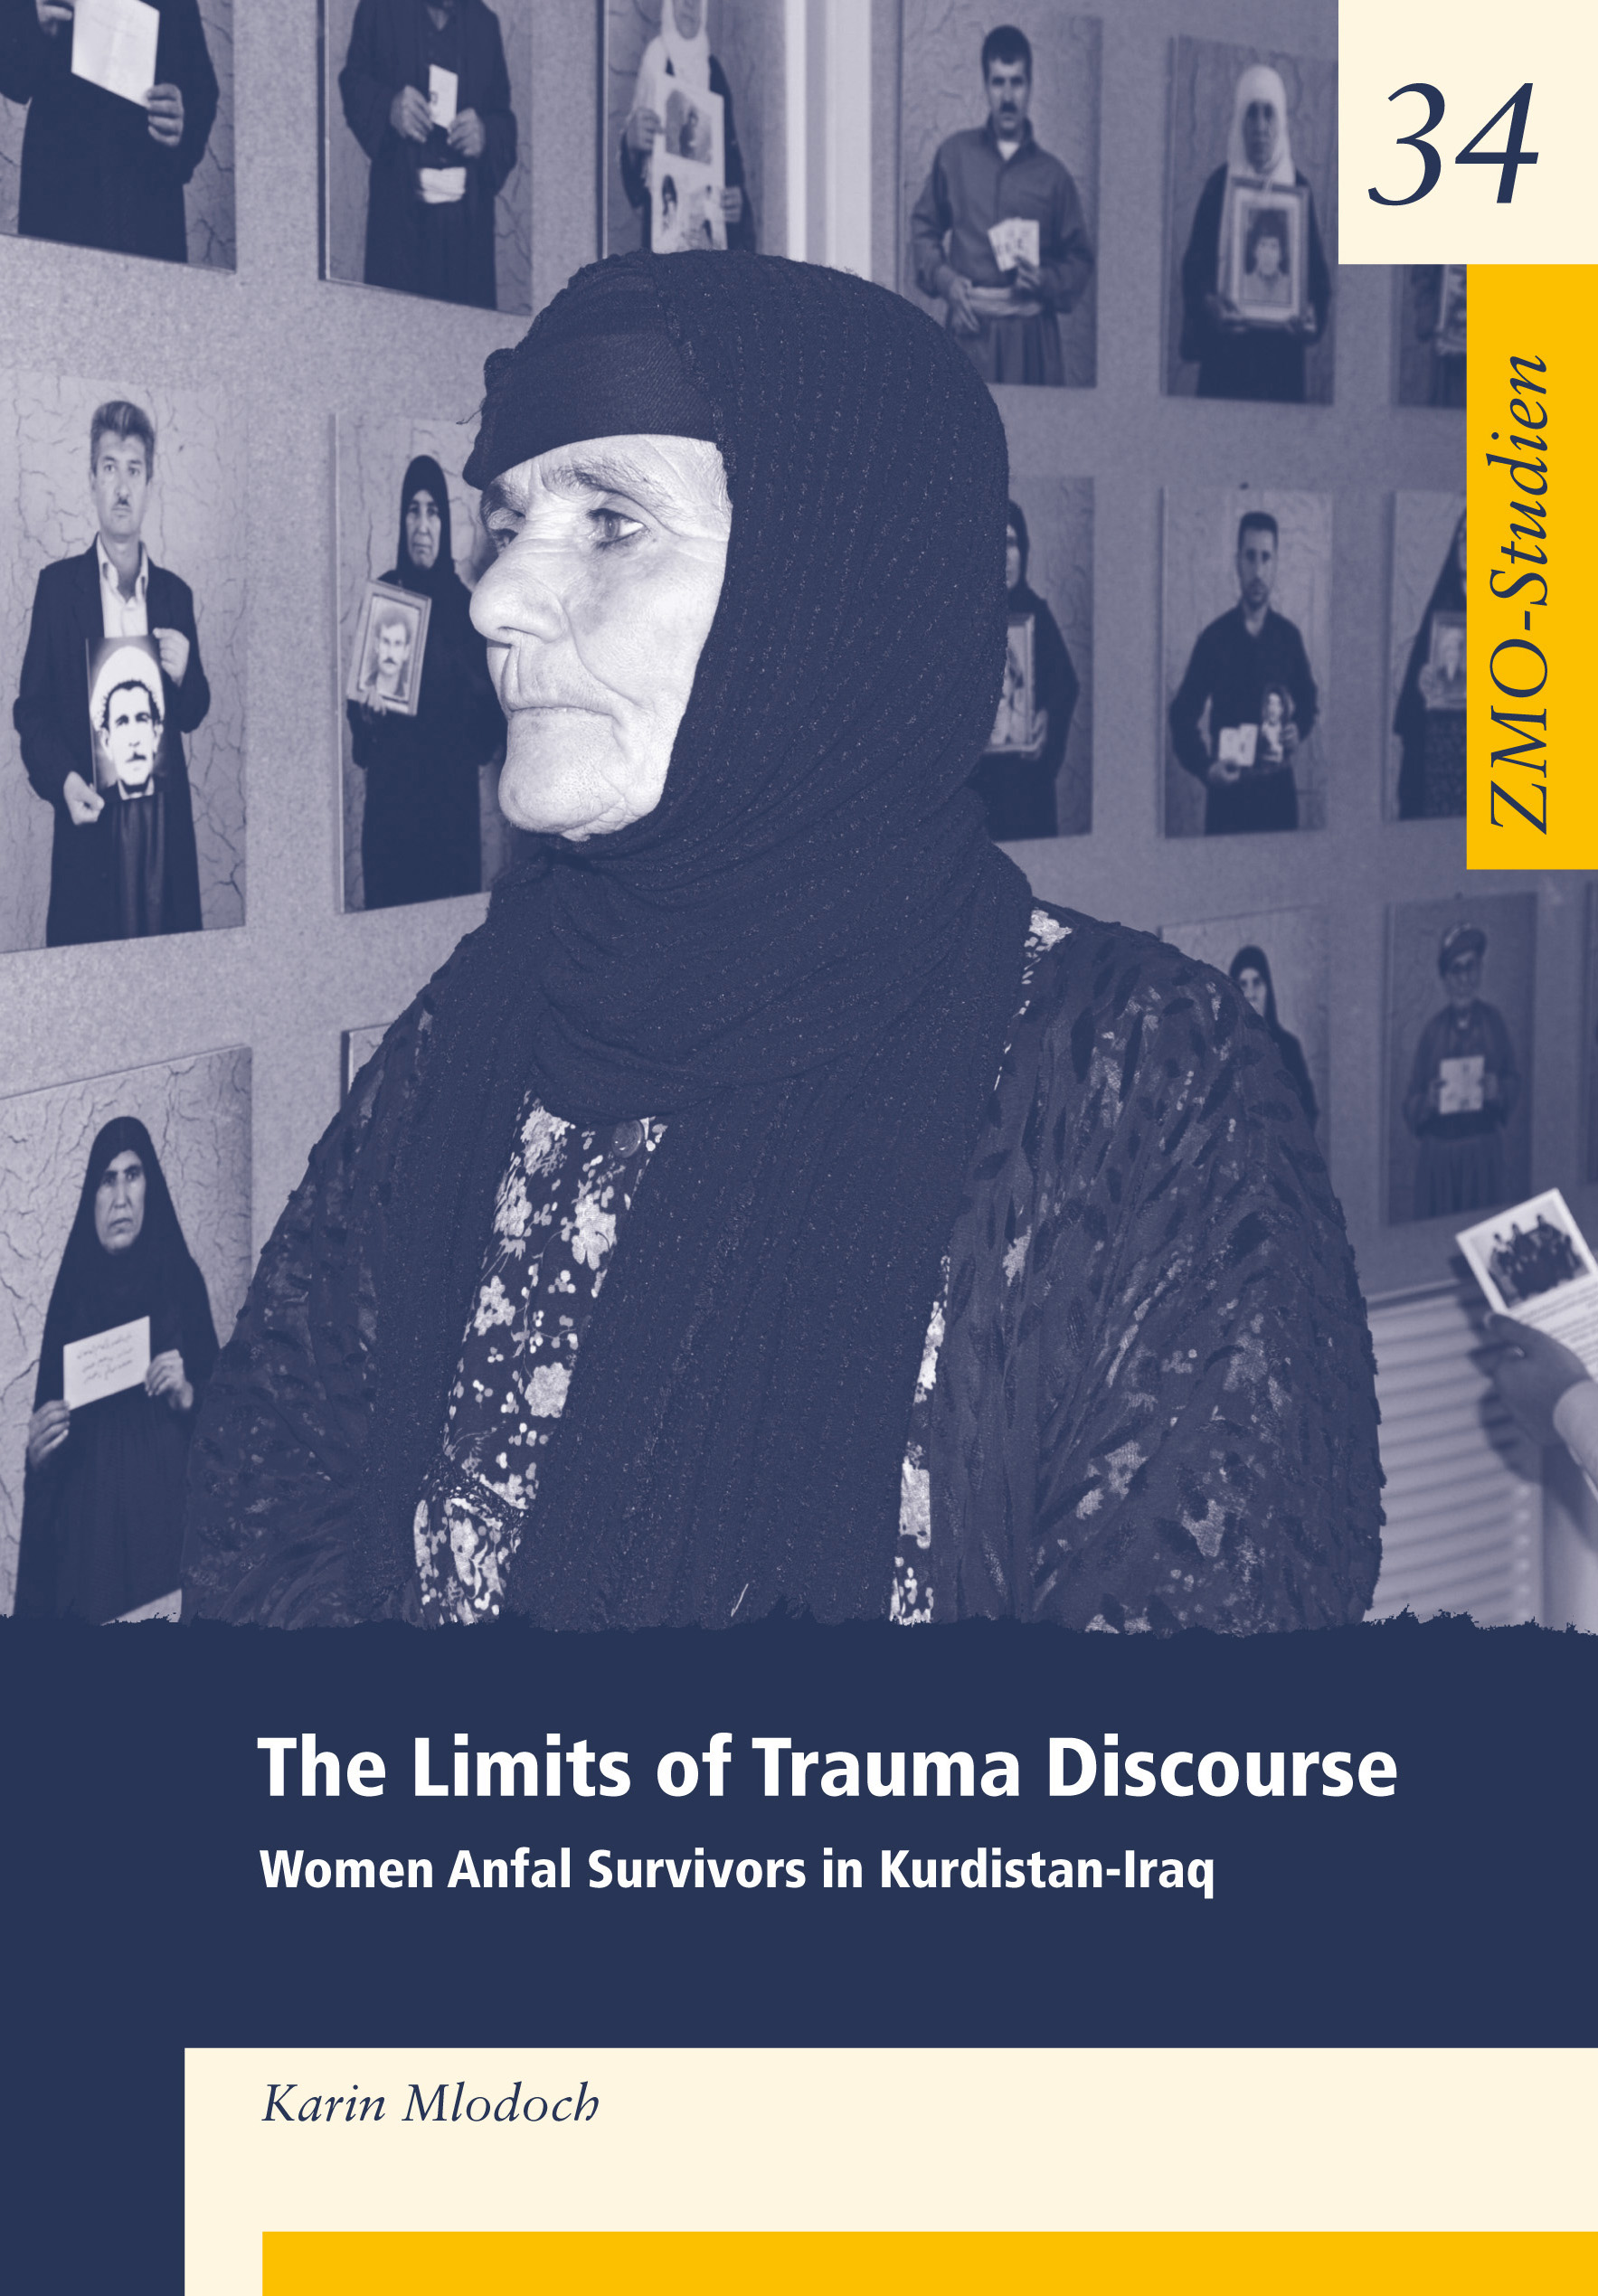 Cover of Karin Mlodochʹs "The Limits of Trauma Discourse" (published by the ZMO in their Study Series)